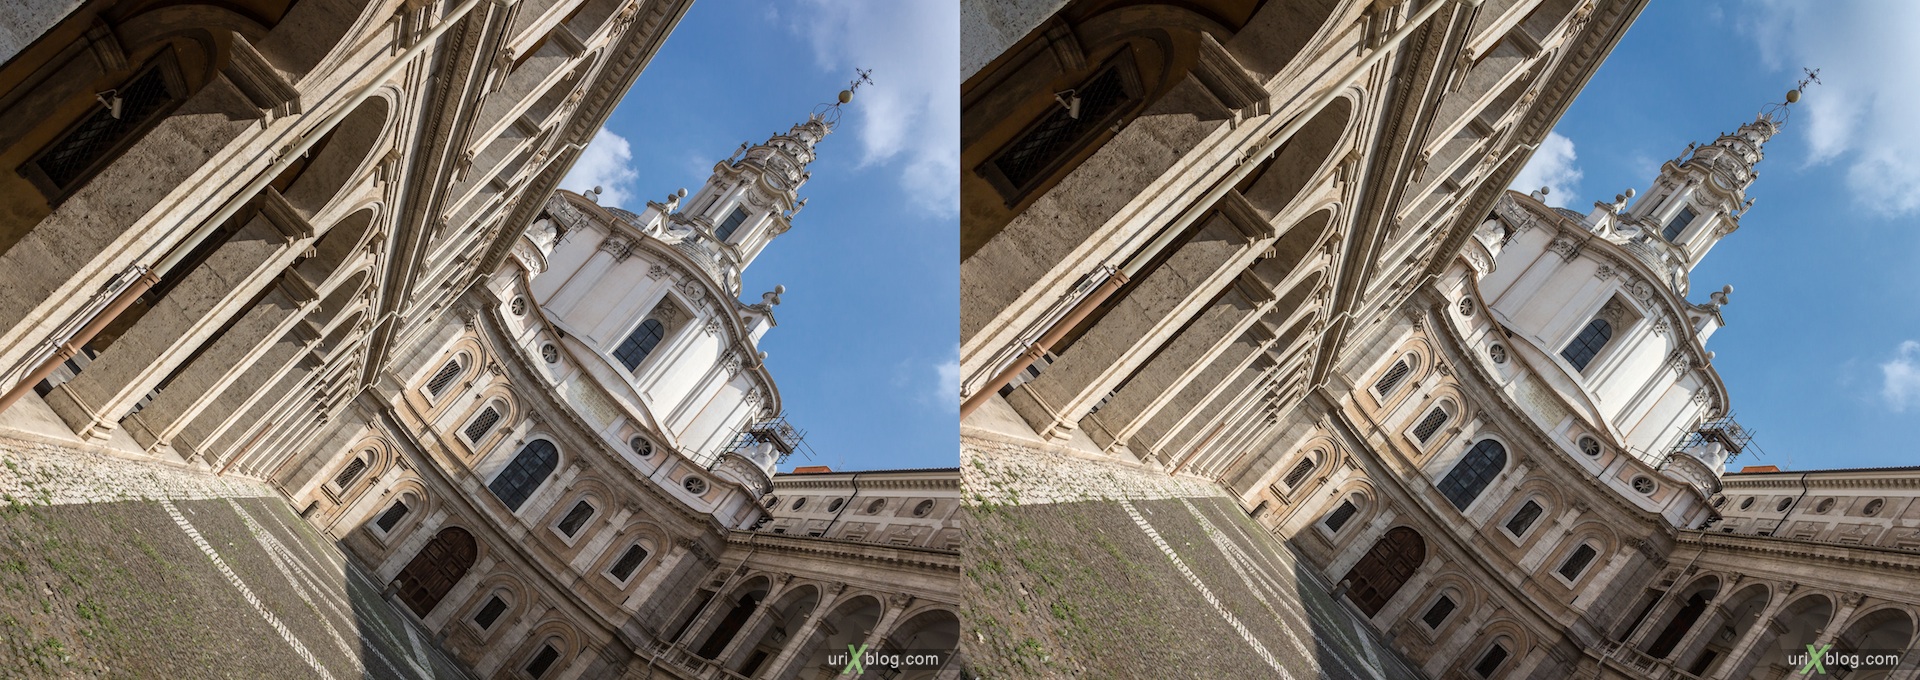 2012, Corso del Rinascimento street, Rome, Italy, 3D, stereo pair, cross-eyed, crossview, cross view stereo pair